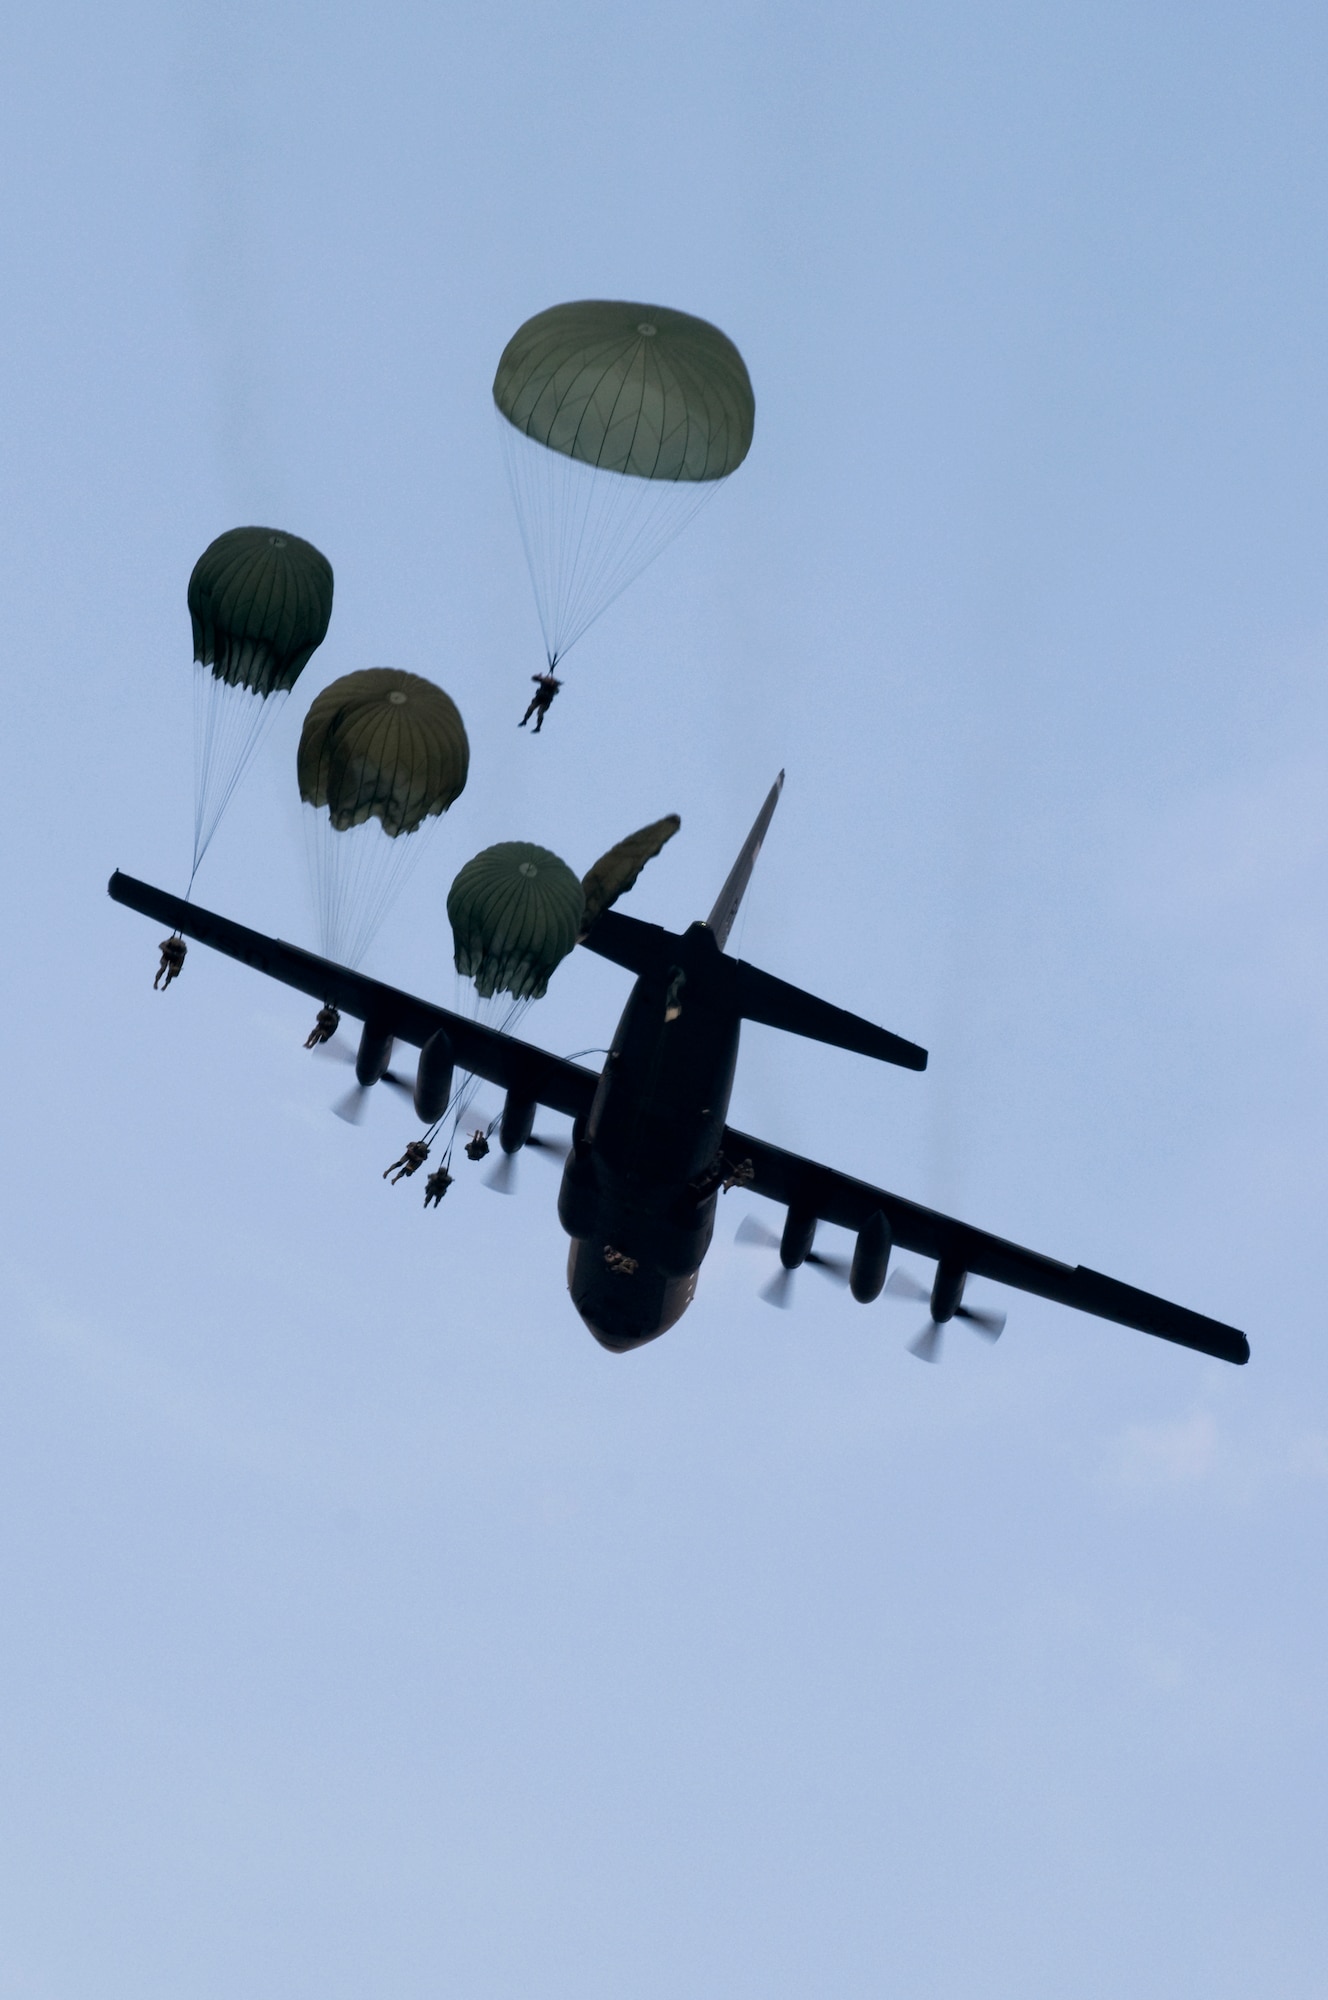 Members from the 173rd Airborne Brigade Combat Team drop out of a C-130E Hercules, April 22, 2009, Grafenwoehr Army Airfield, Germany. This is the last large combat training drop for a C-130E in Germany. (U.S. Air Force photo by Senior Airman Nathan Lipscomb)